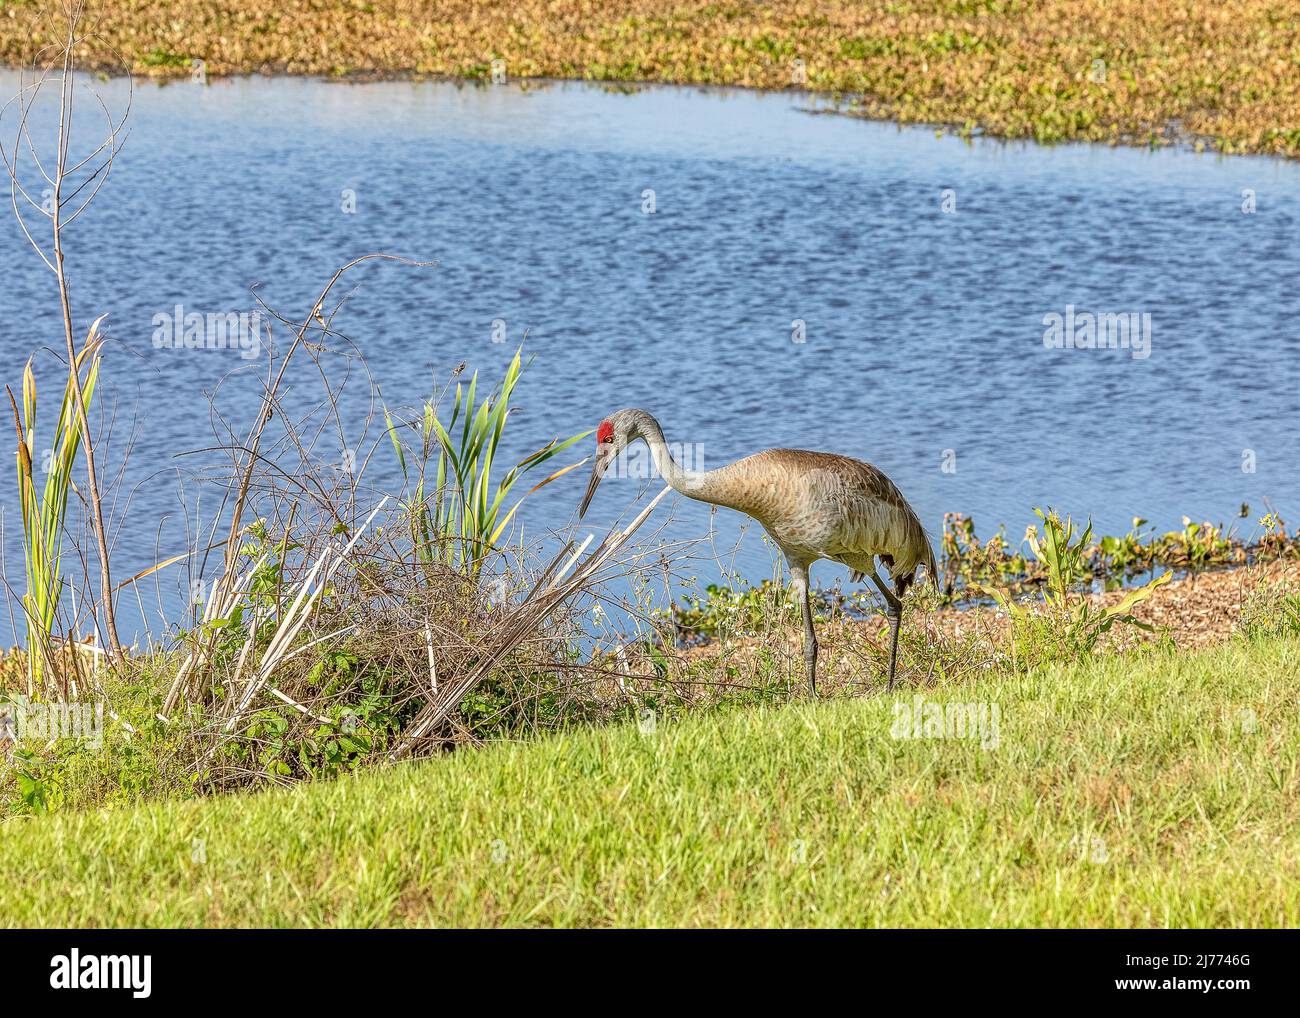 Sandhill crane standing along a pond at Sweetwater wetlands park Stock Photo